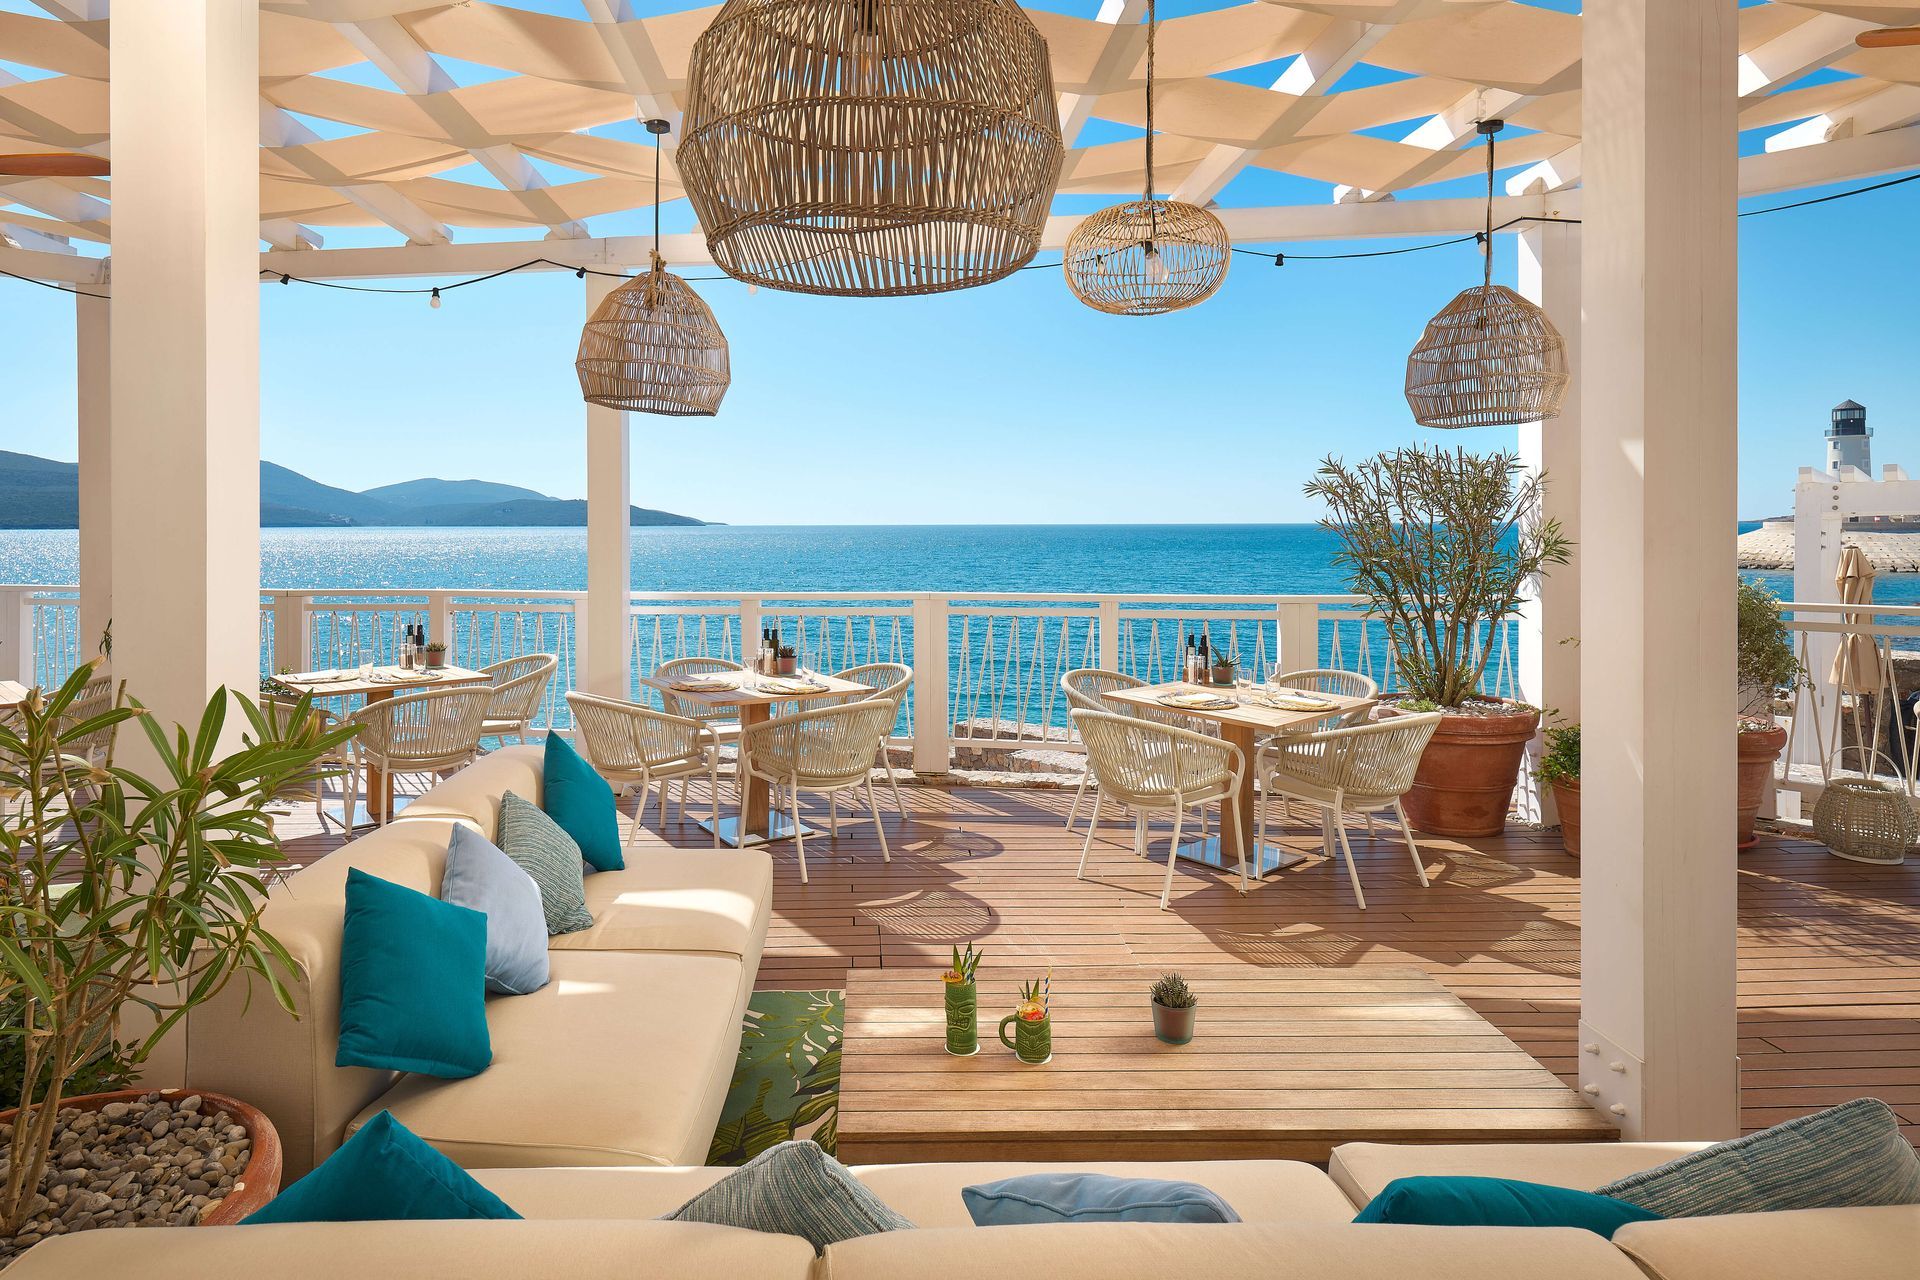 A restaurant with a view of the ocean and tables and chairs.